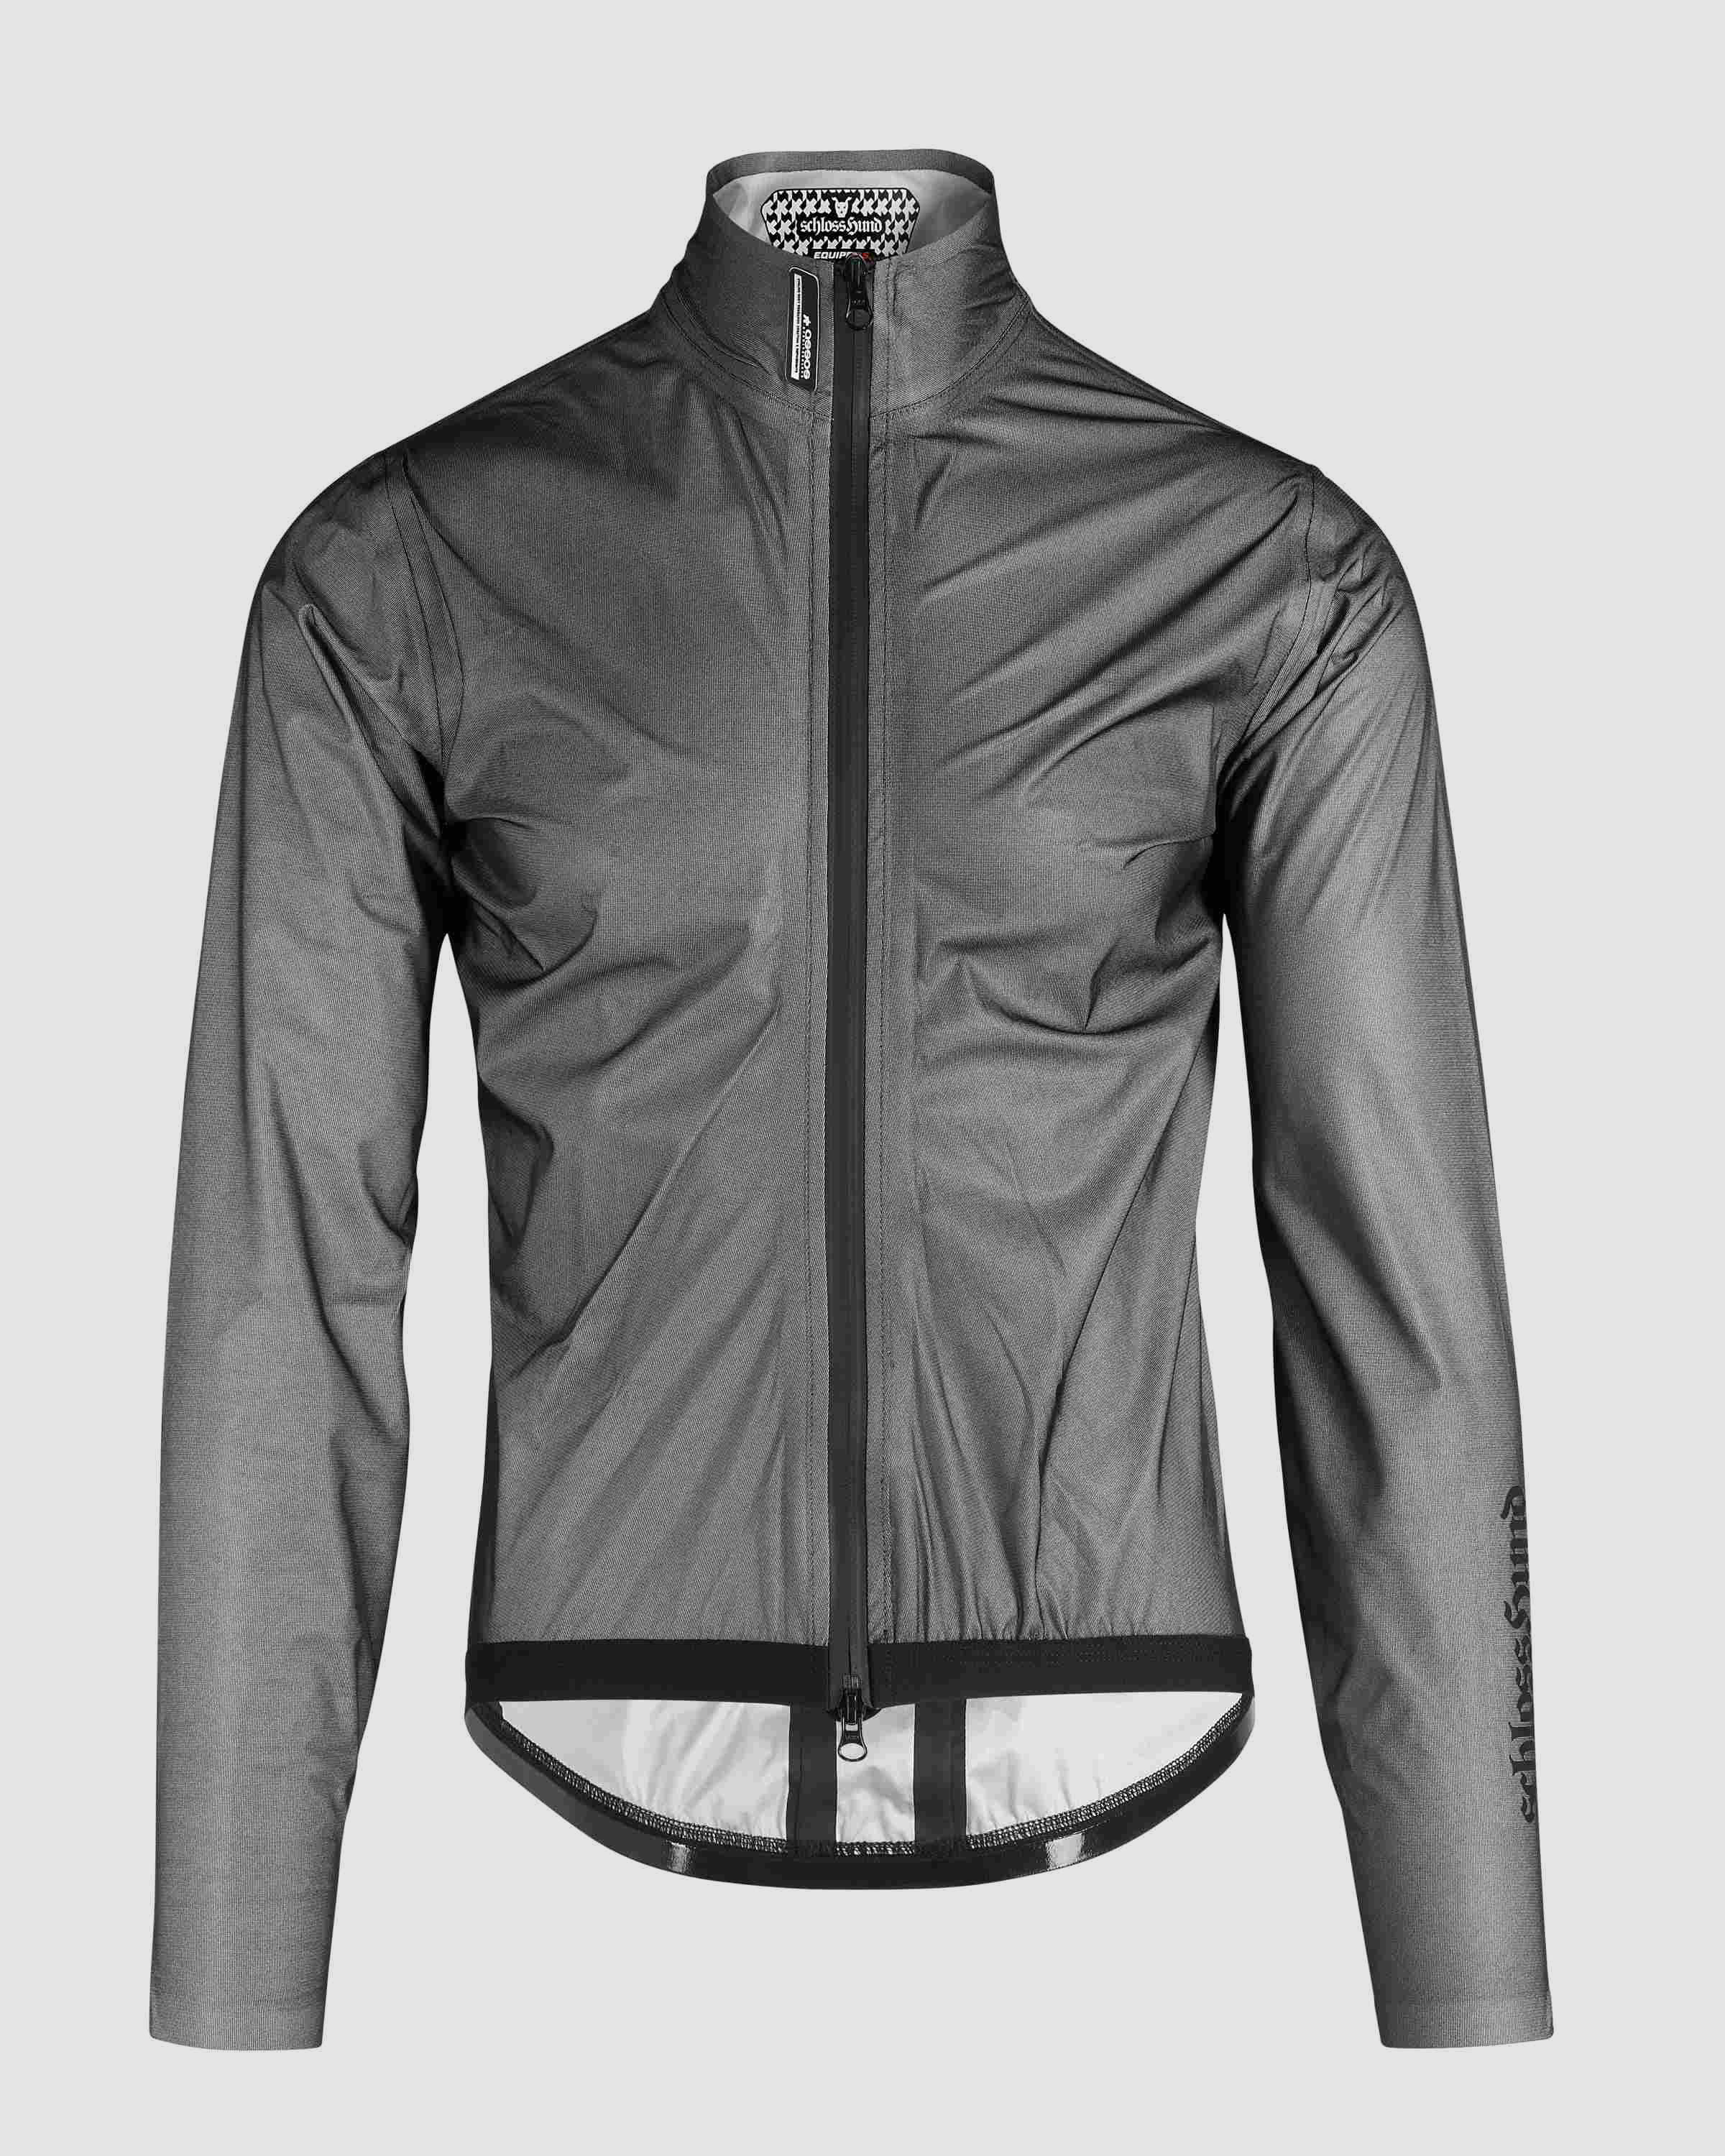 EQUIPE RS rain jacket - ASSOS Of Switzerland - Official Outlet